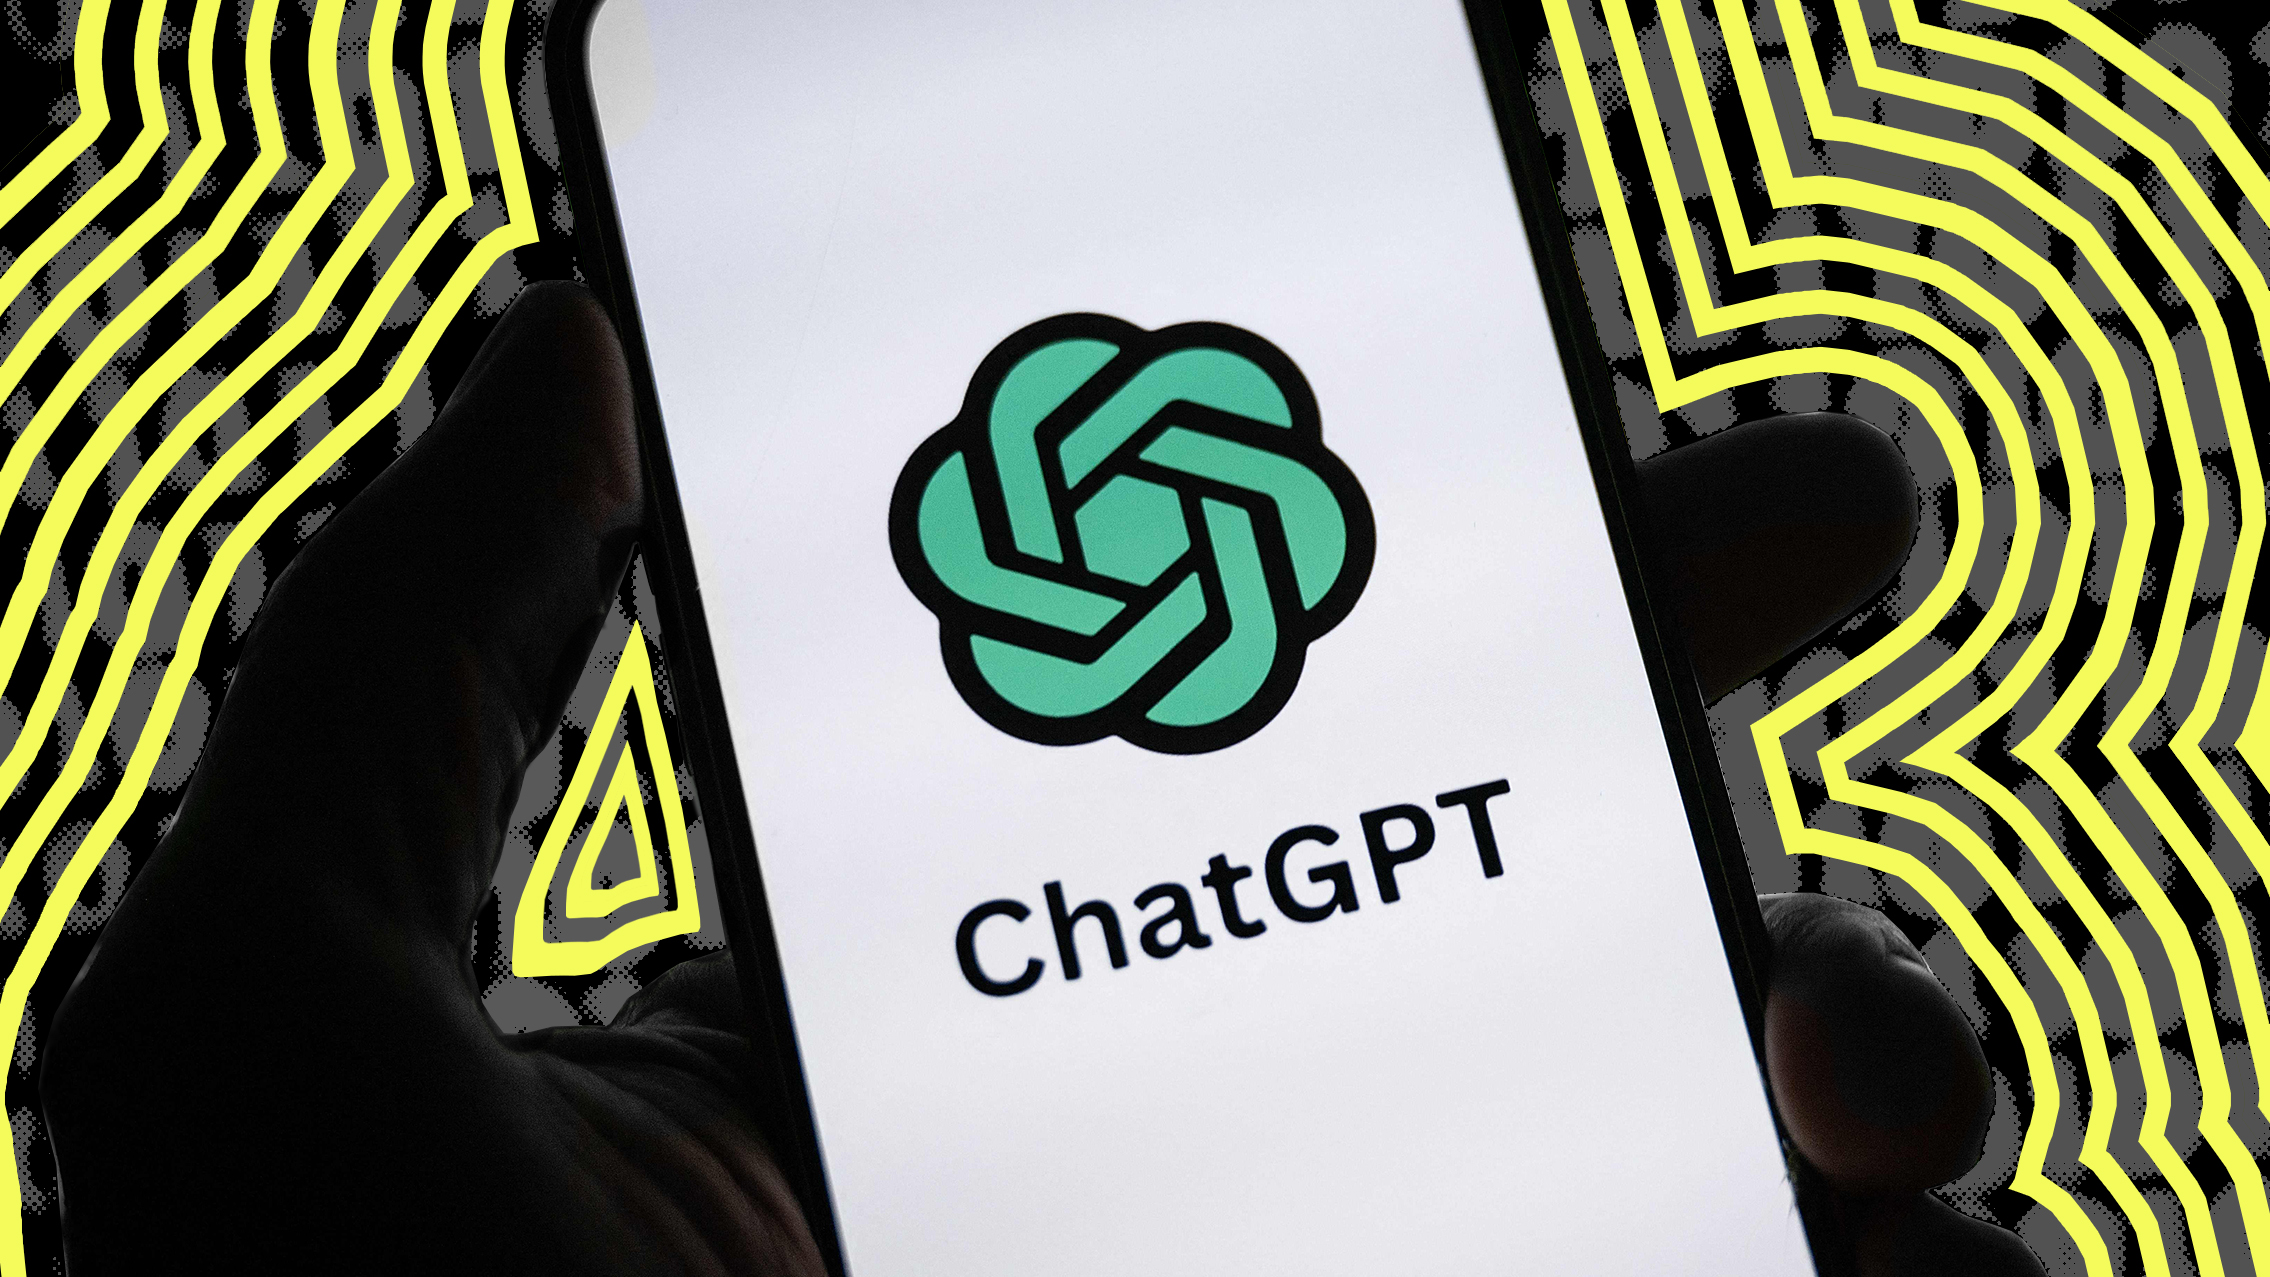 How to Use ChatGPT in Non-Evil Ways